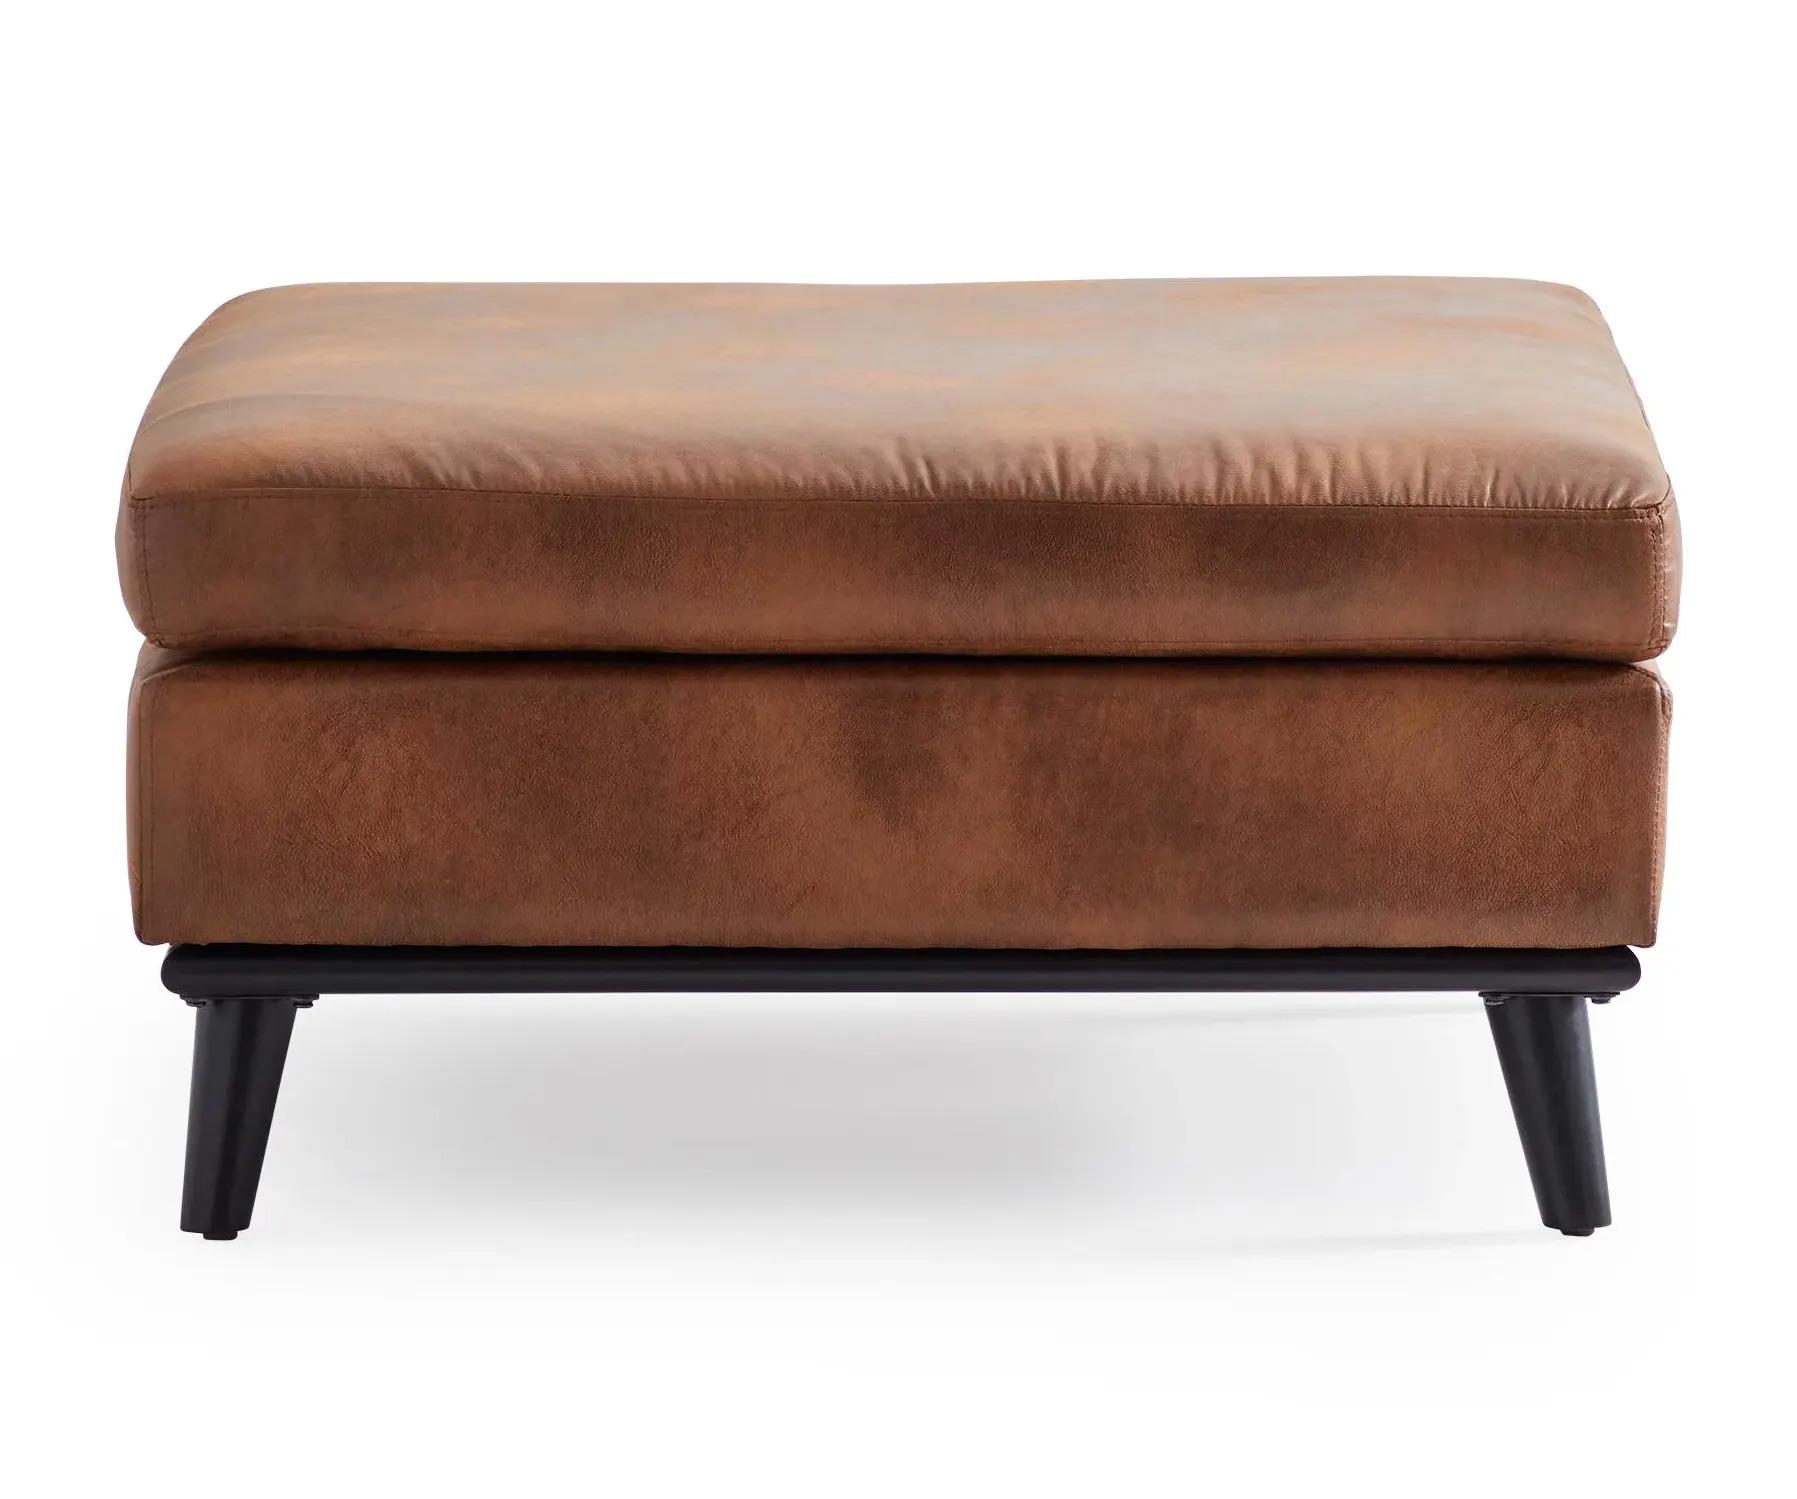 Gap Home Mid-Century Upholstered Square Ottoman for $108 Shipped